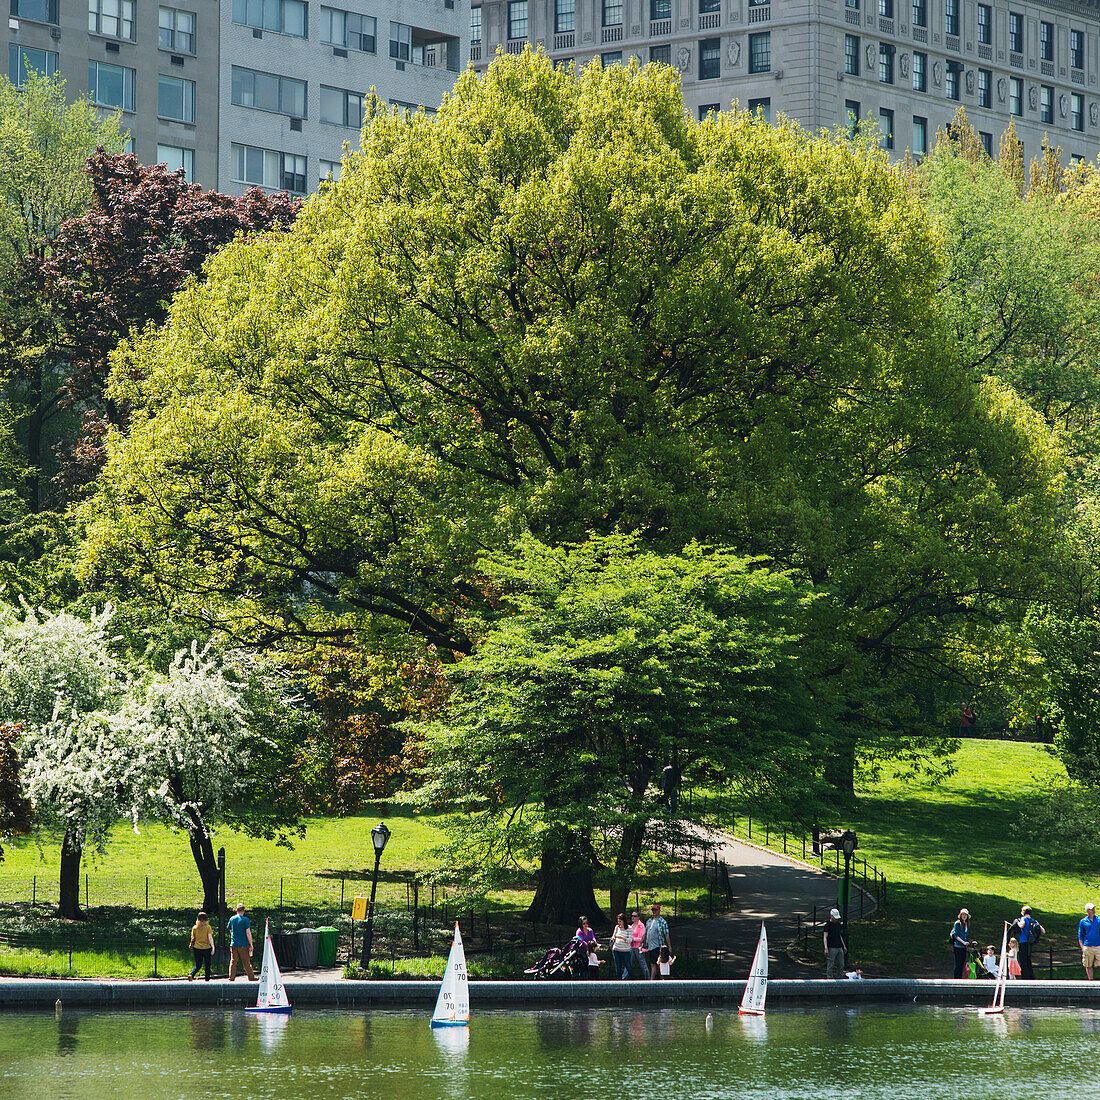 'Miniature sailboats on the water at an urban park; New York City, New York, United States of America'